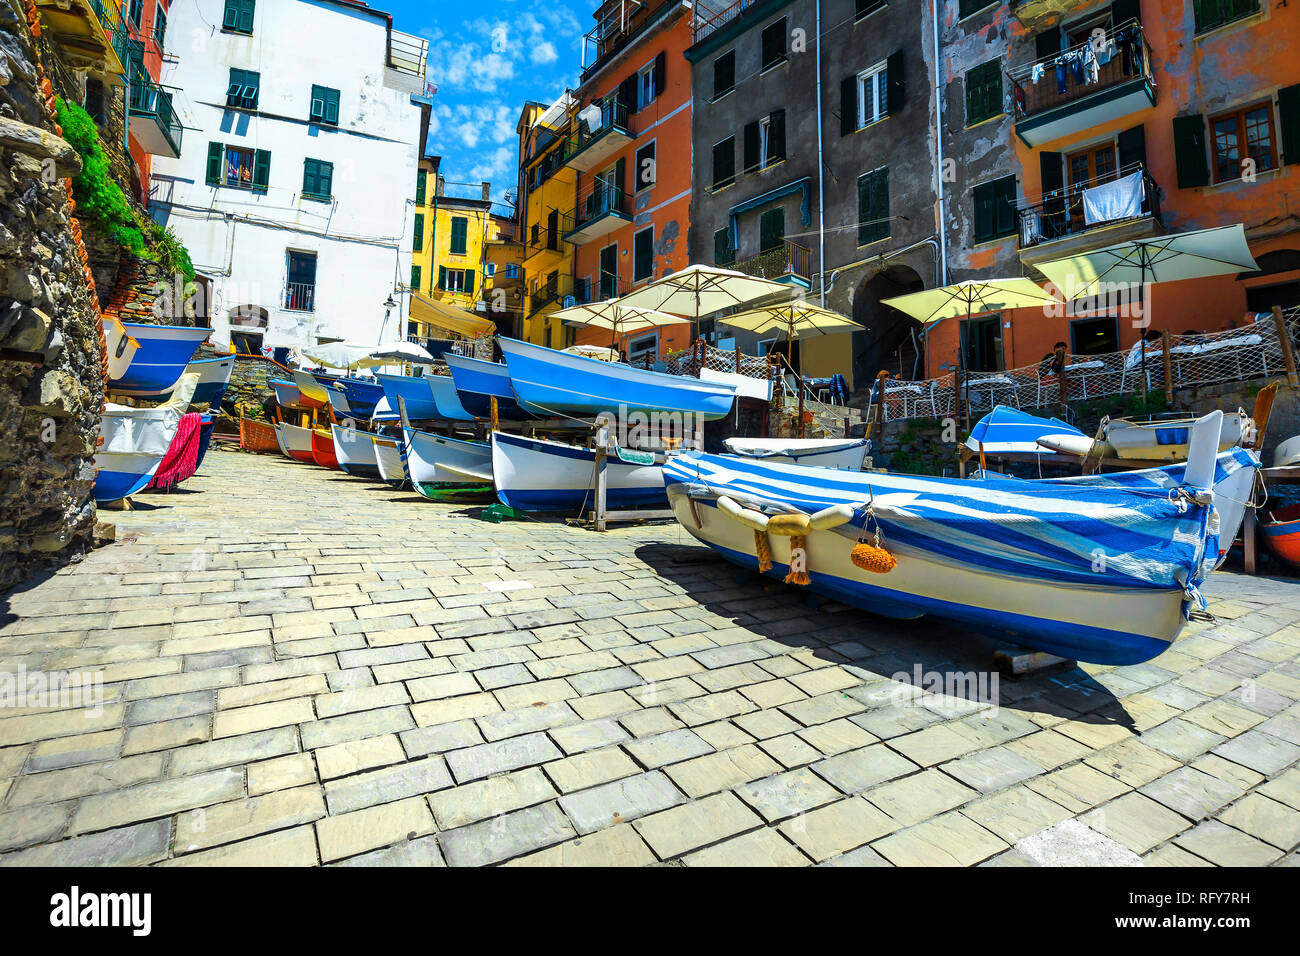 Breathtaking Riomaggiore touristic village and travel destinations. Admirable street view with wooden fishing boats and traditional colorful buildings Stock Photo